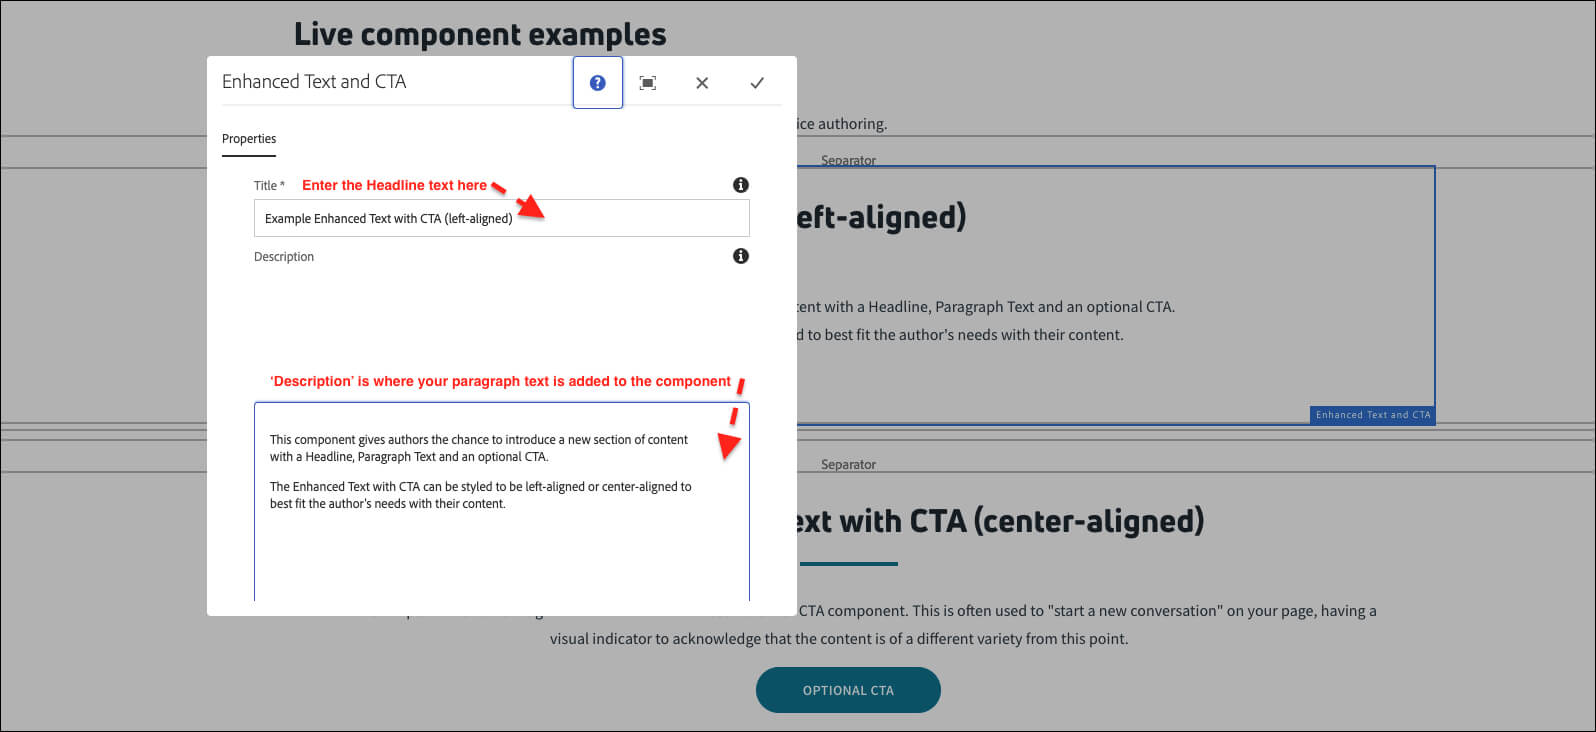 Authoring the Enhanced Text with CTA with the Configure menu